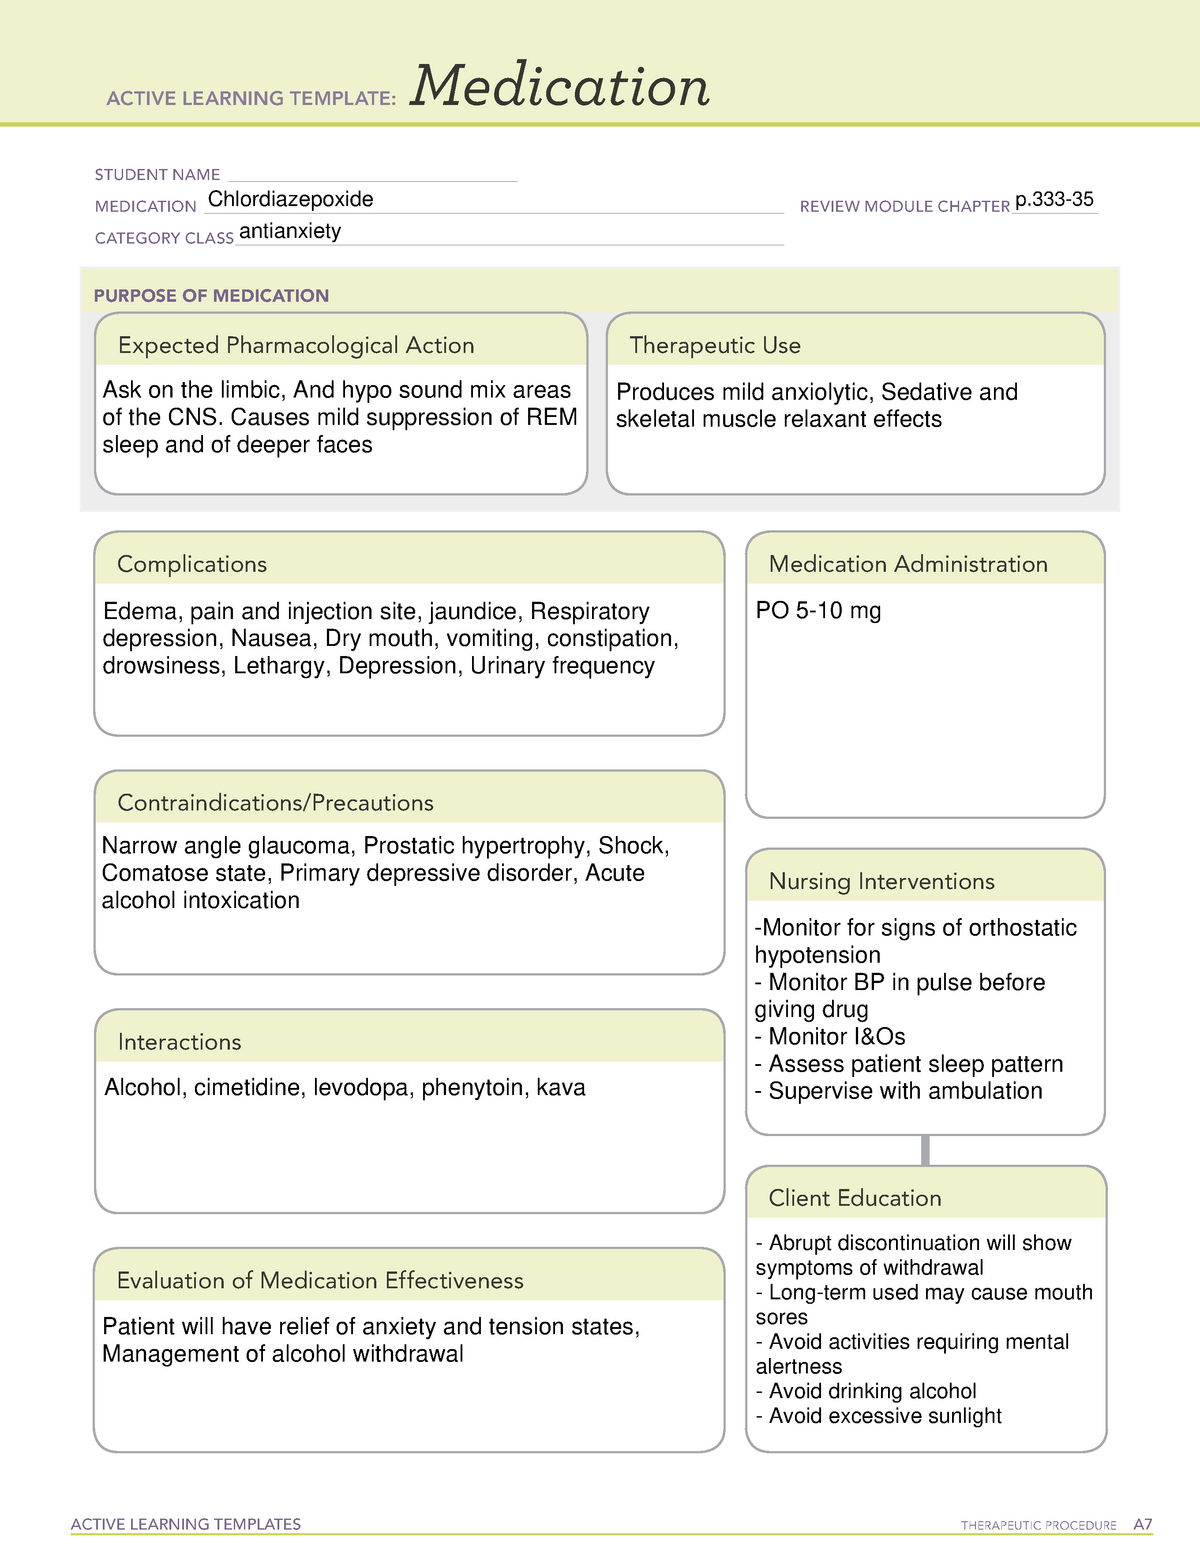 Chlordiazepoxide Medication ATI template ACTIVE LEARNING TEMPLATES